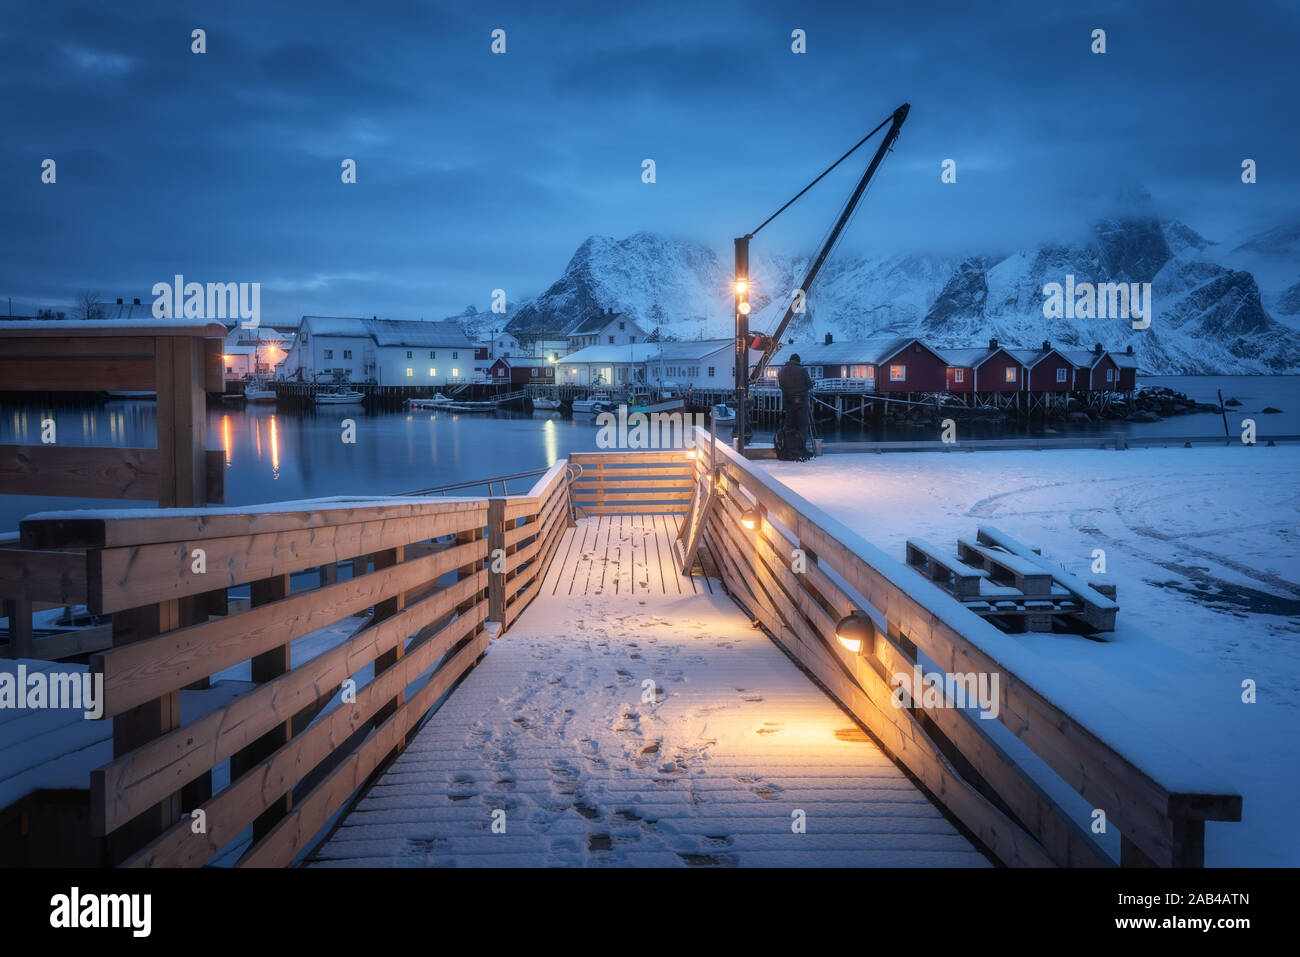 Snowy wooden pier on the sea coast with lights, houses and boats Stock Photo